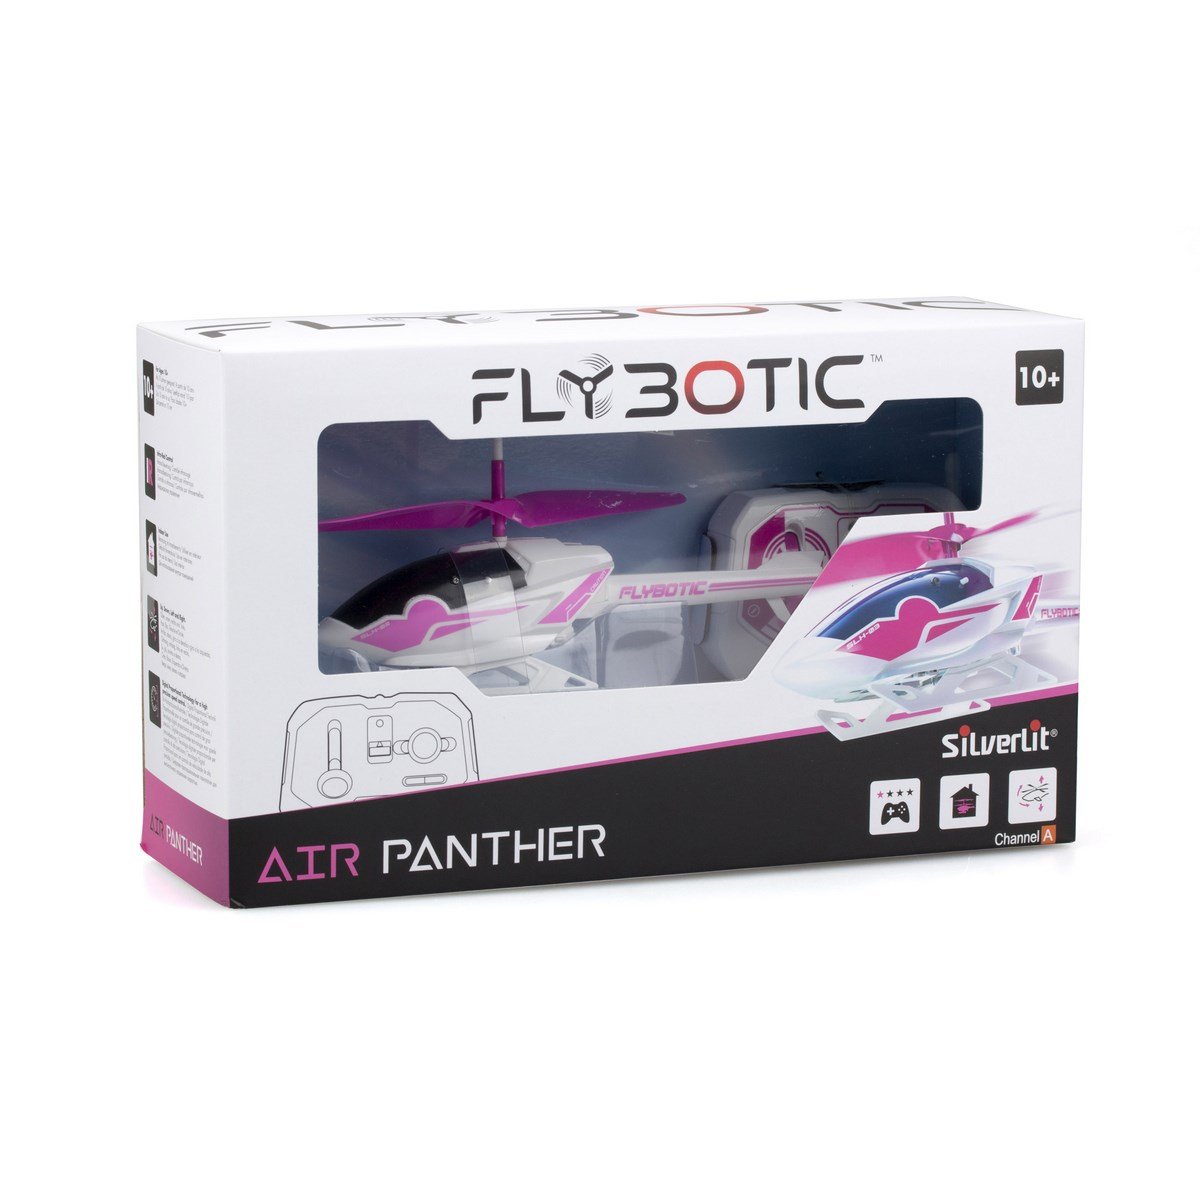 Flybotic - helicoptere telecommande - airstork, vehicules-garages